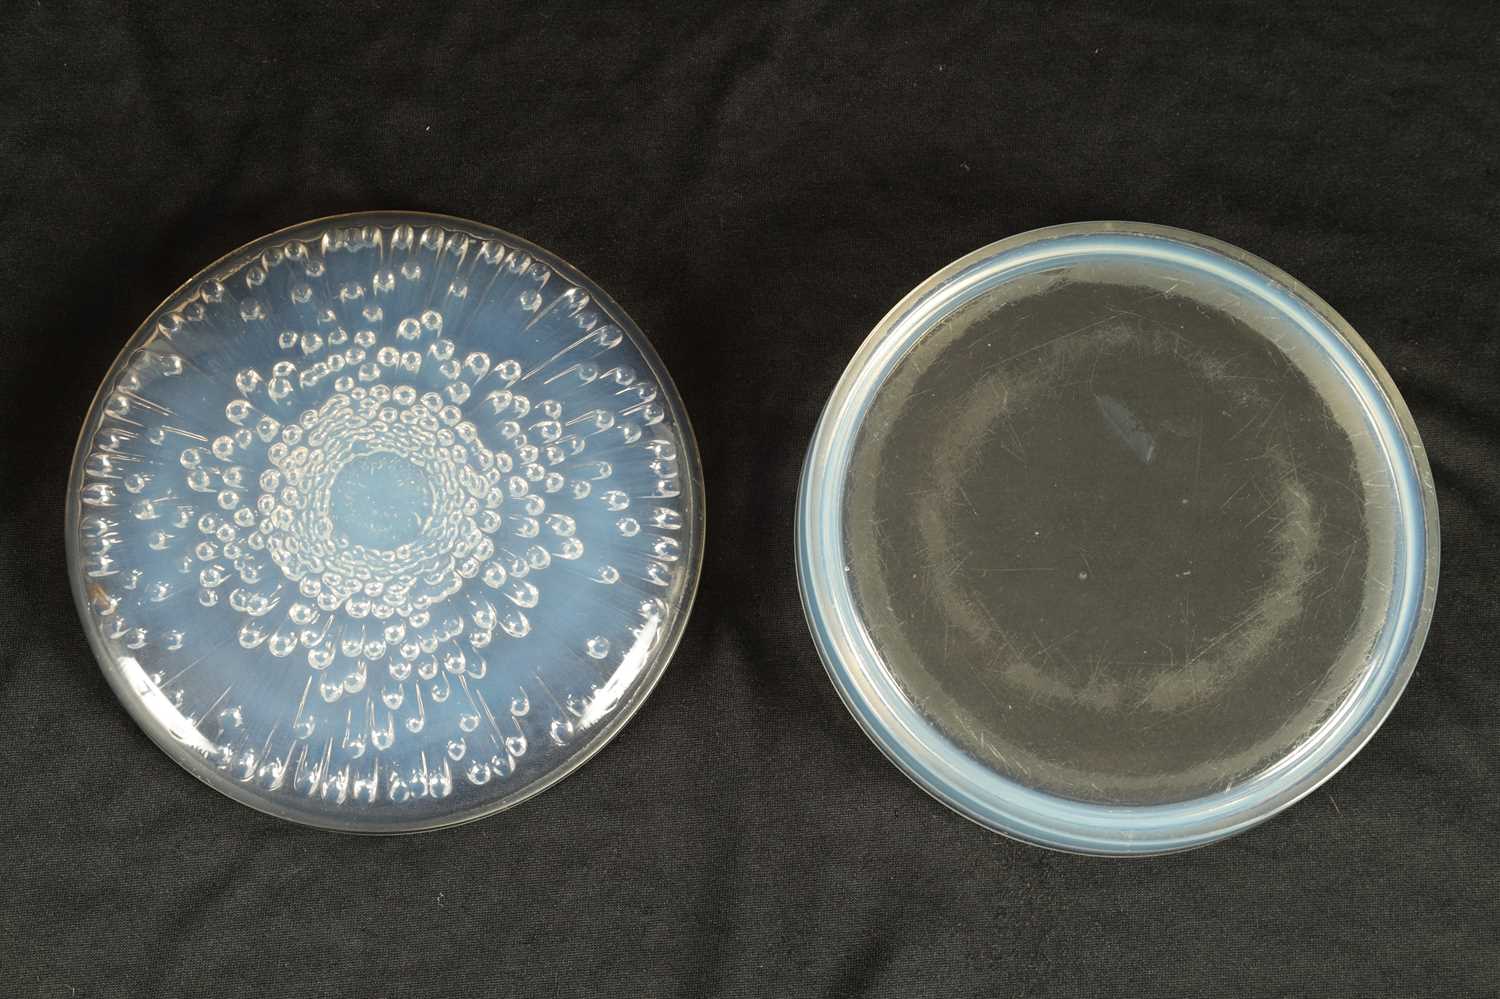 A RENE LALIQUE 'TOKIO' OPALESCENT GLASS LIDDED POWDER BOX - Image 3 of 8